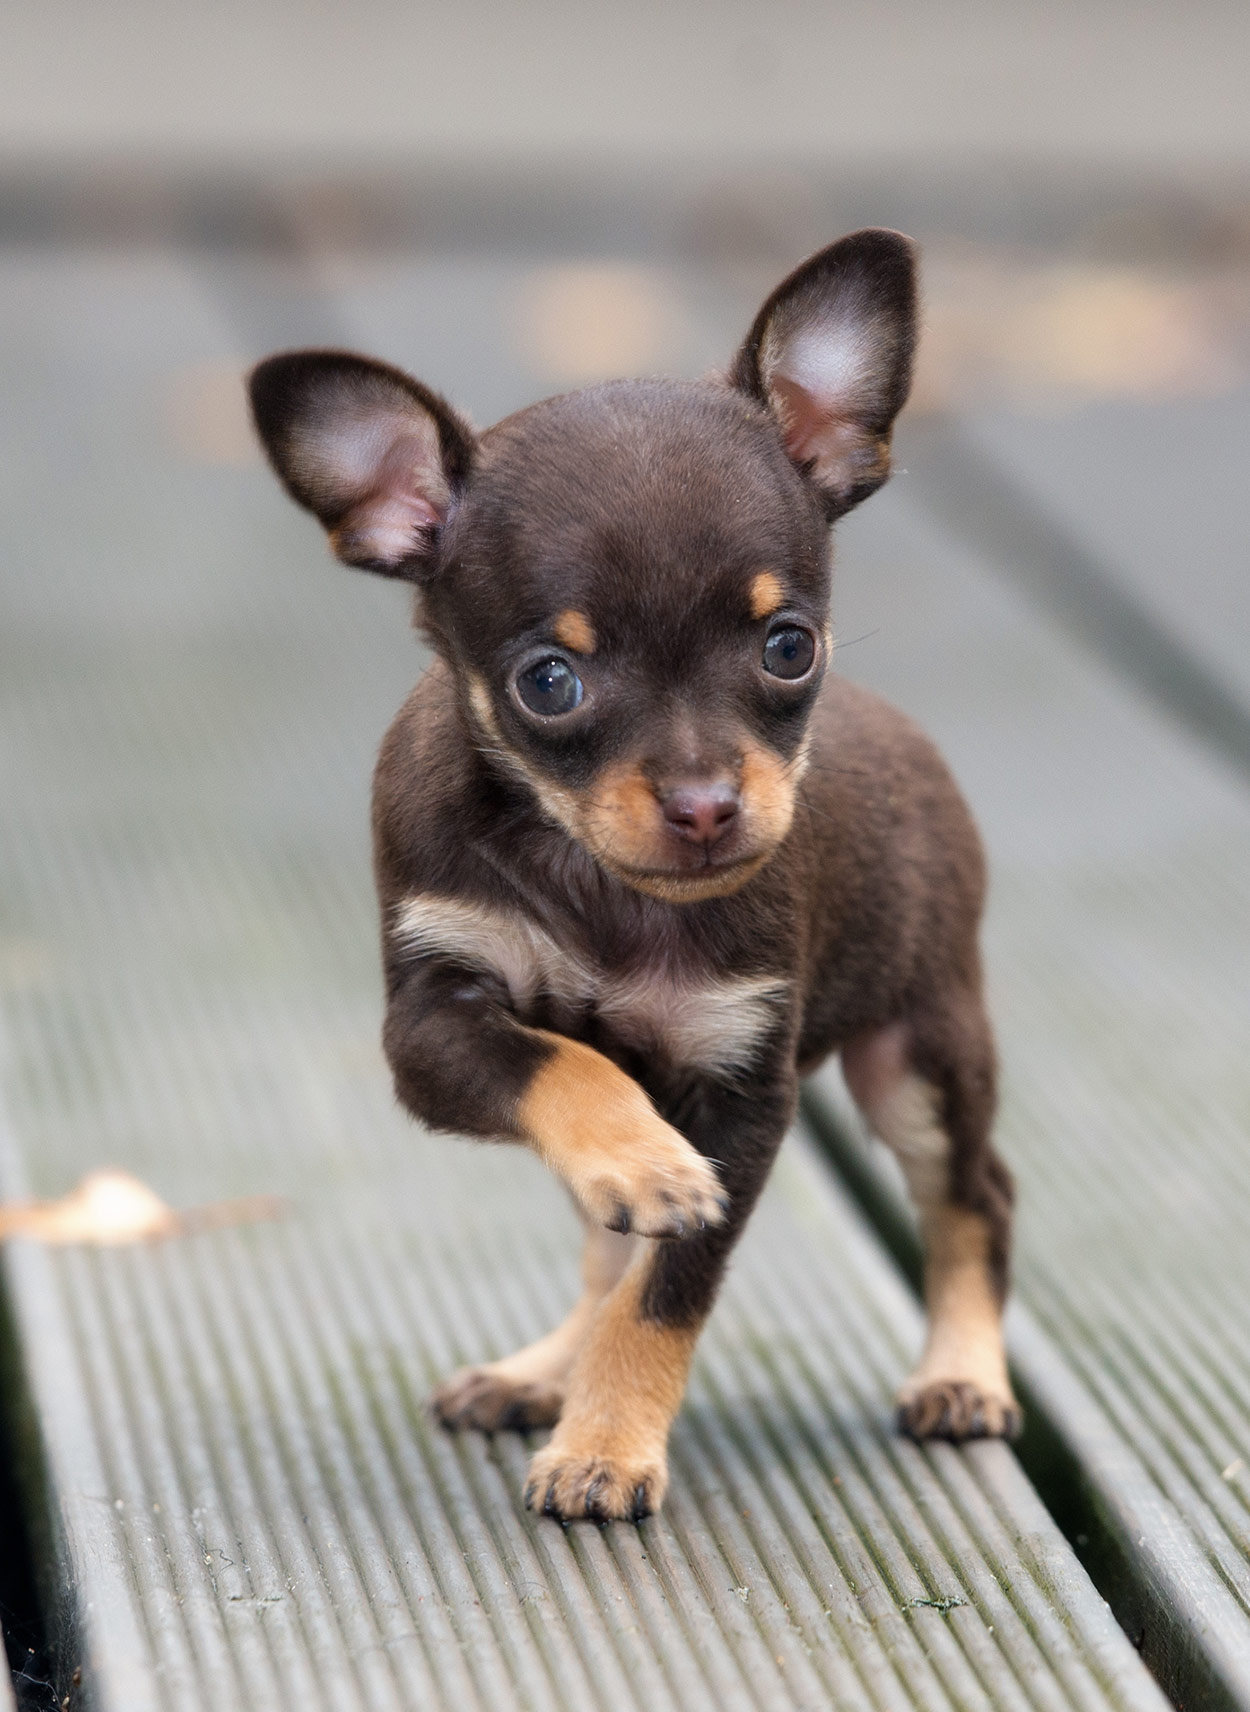 Teacup Chihuahua - Is This Tiny Pup The Right Choice For Your Family?